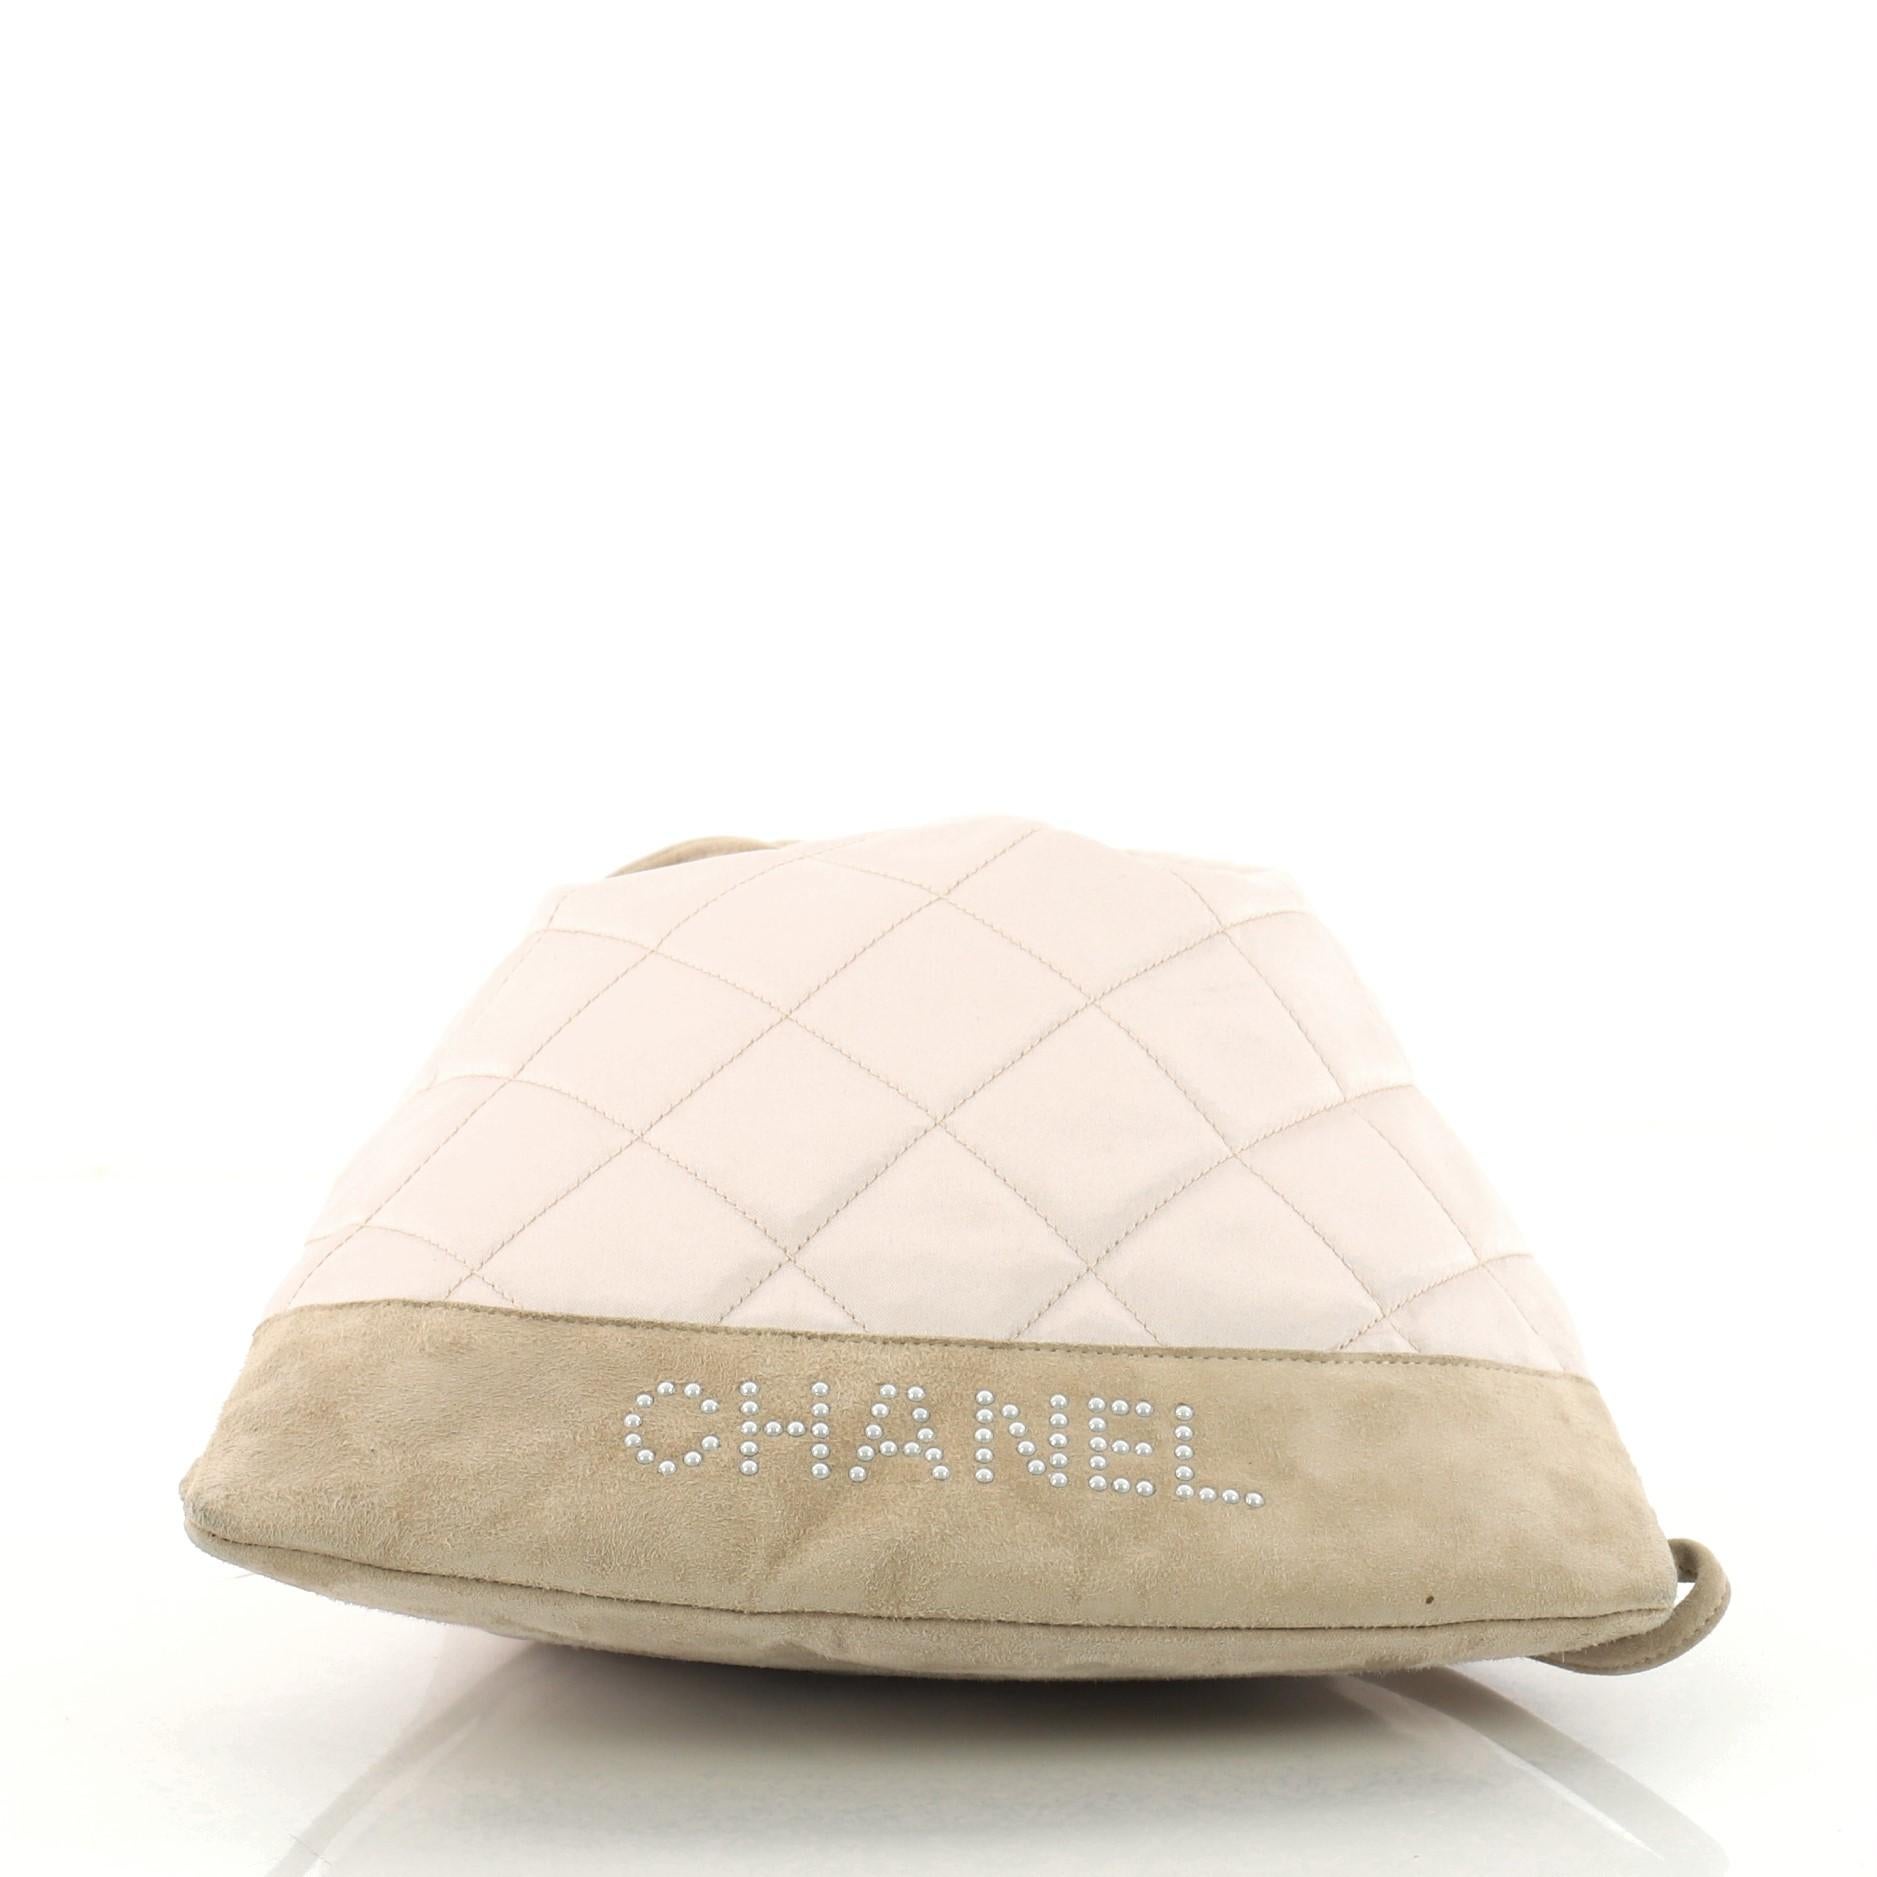 Chanel Vintage Drawstring Backpack Quilted Satin with Suede Medium 1